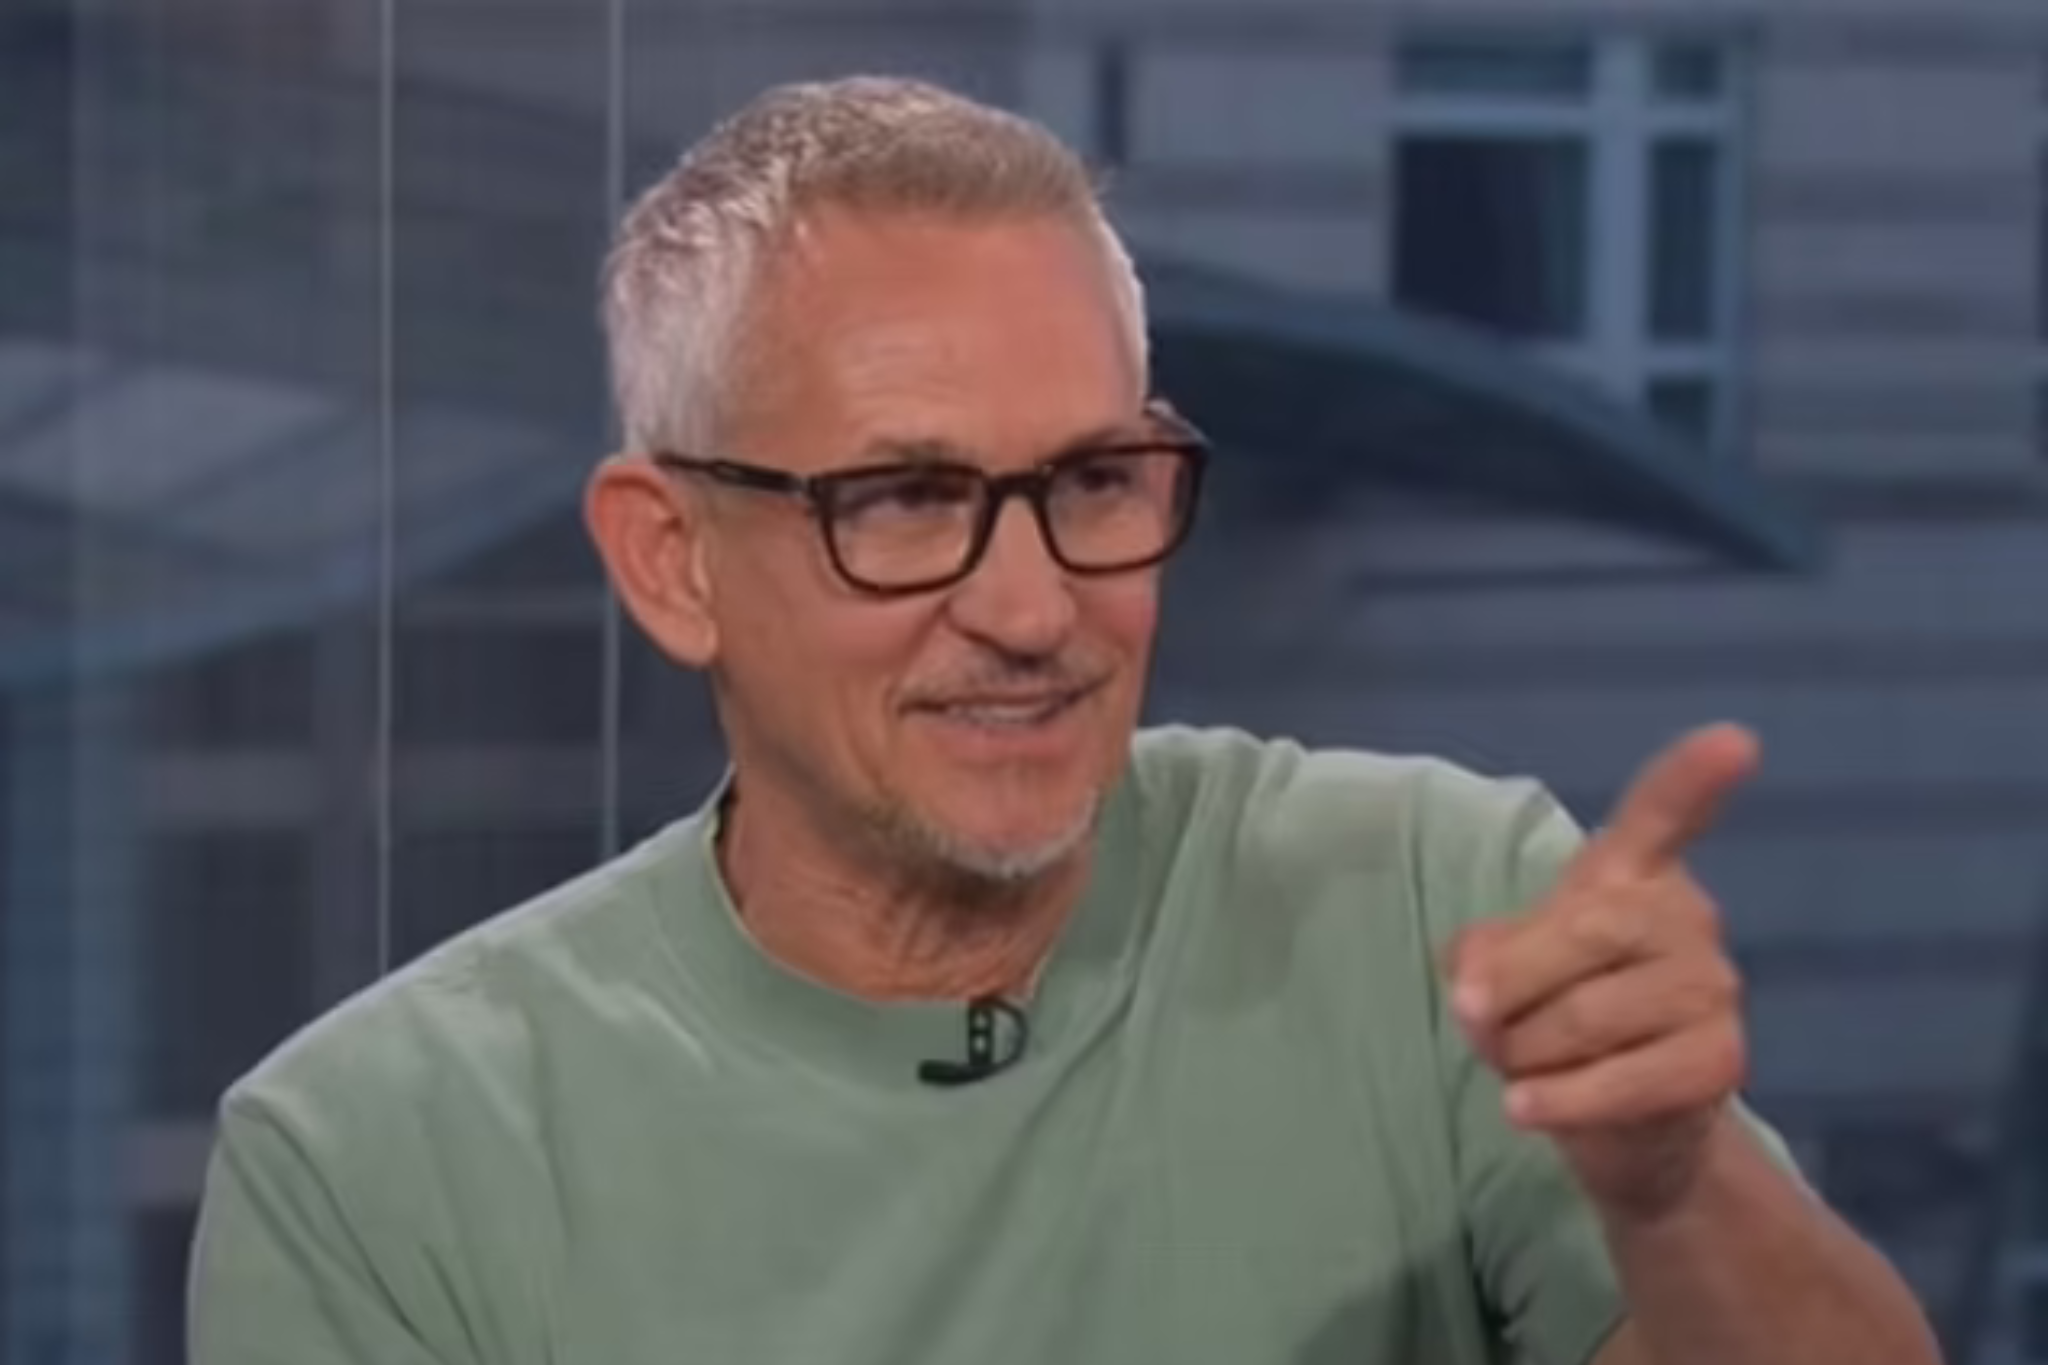 gary lineker, clothing line, gary lineker ‘breaks bbc advertising rules’ by wearing his clothing line on air